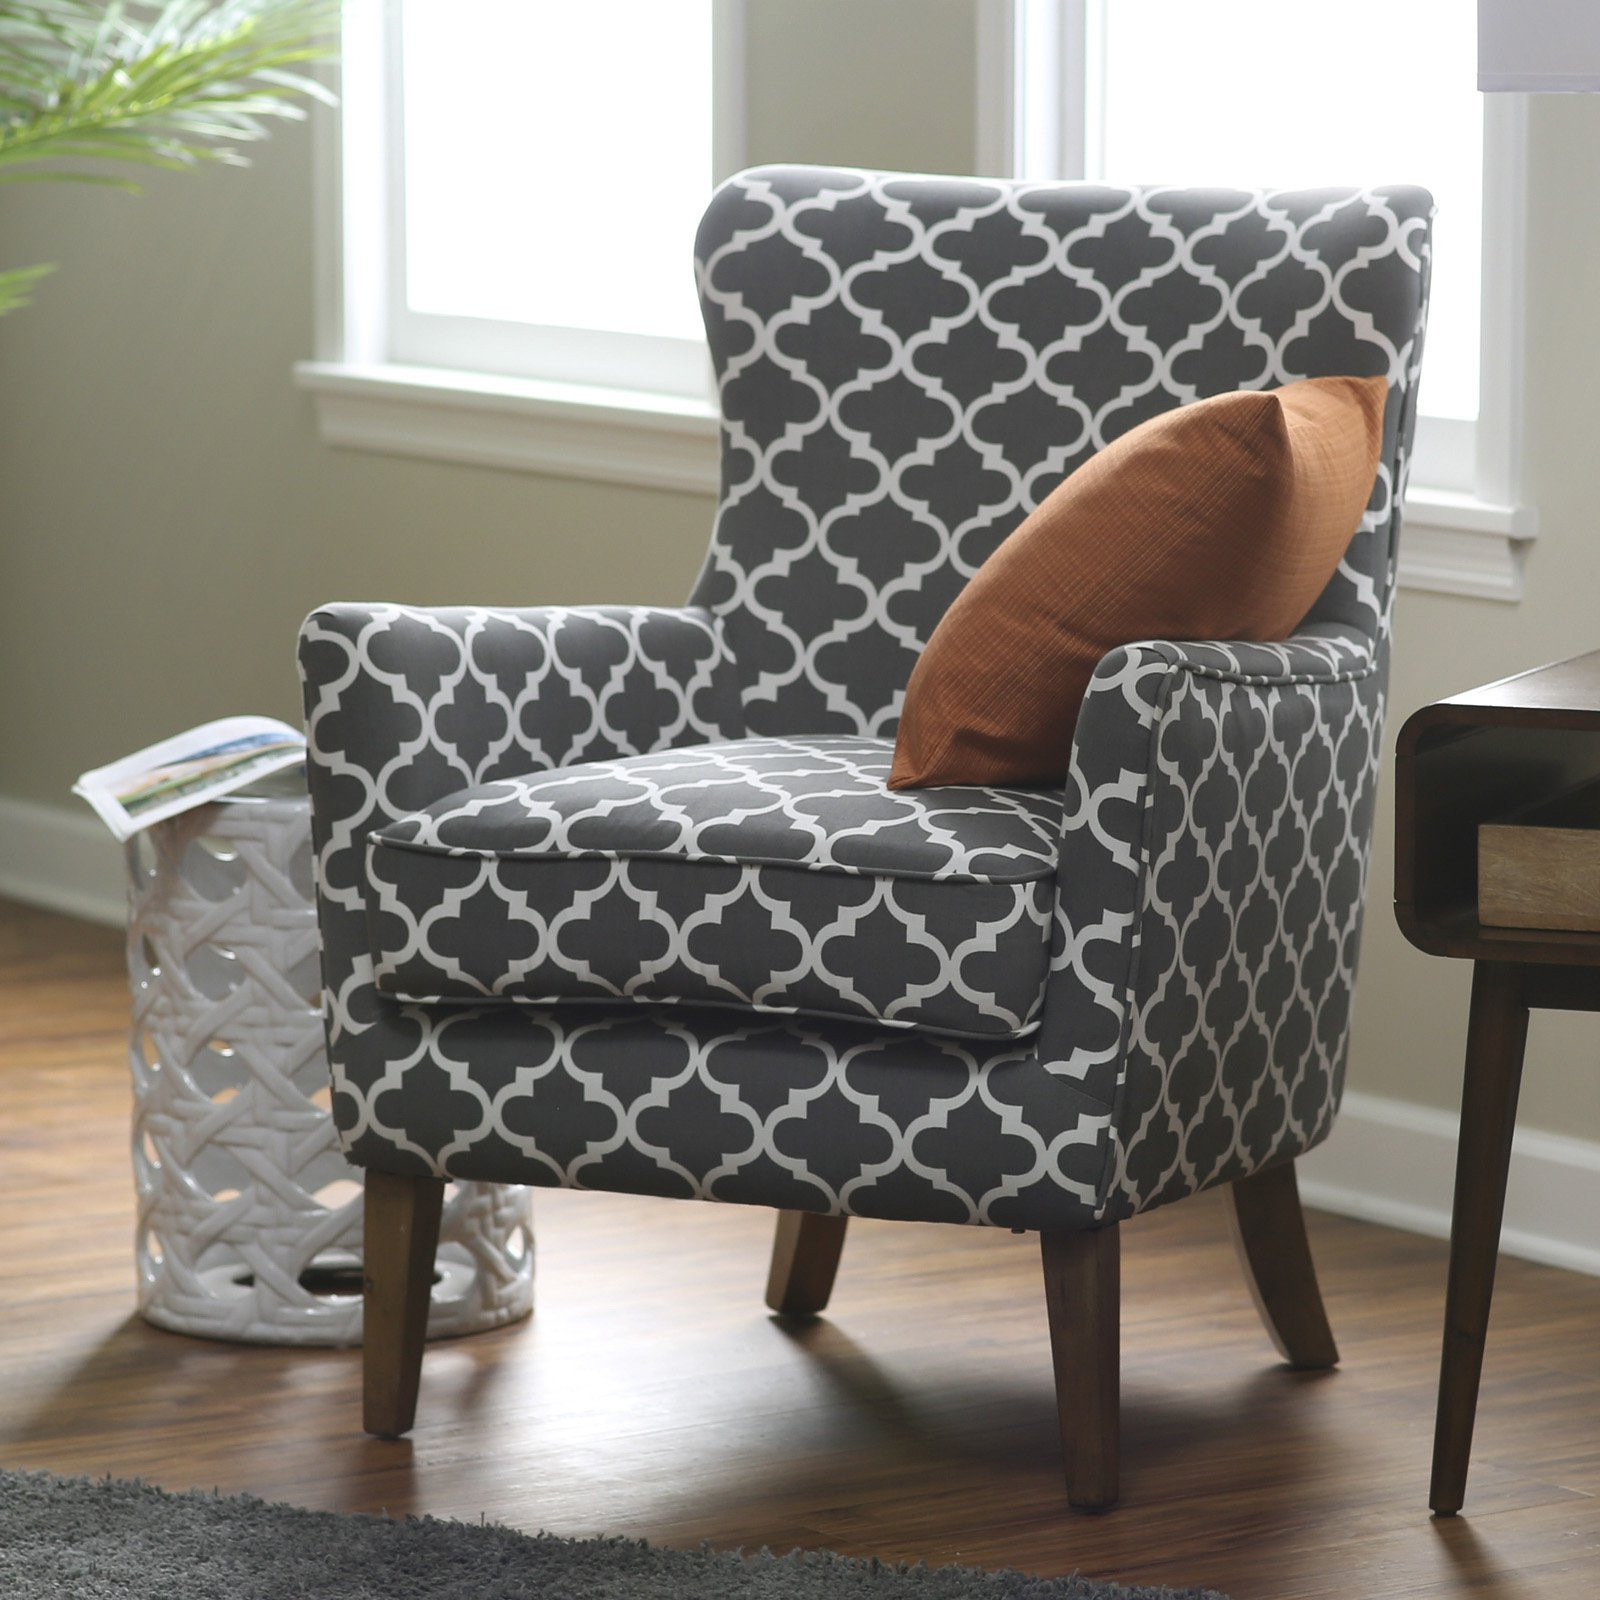 Printed Living Room Chairs
 Belham Living Palmer Printed Arm Chair Accent Chairs at